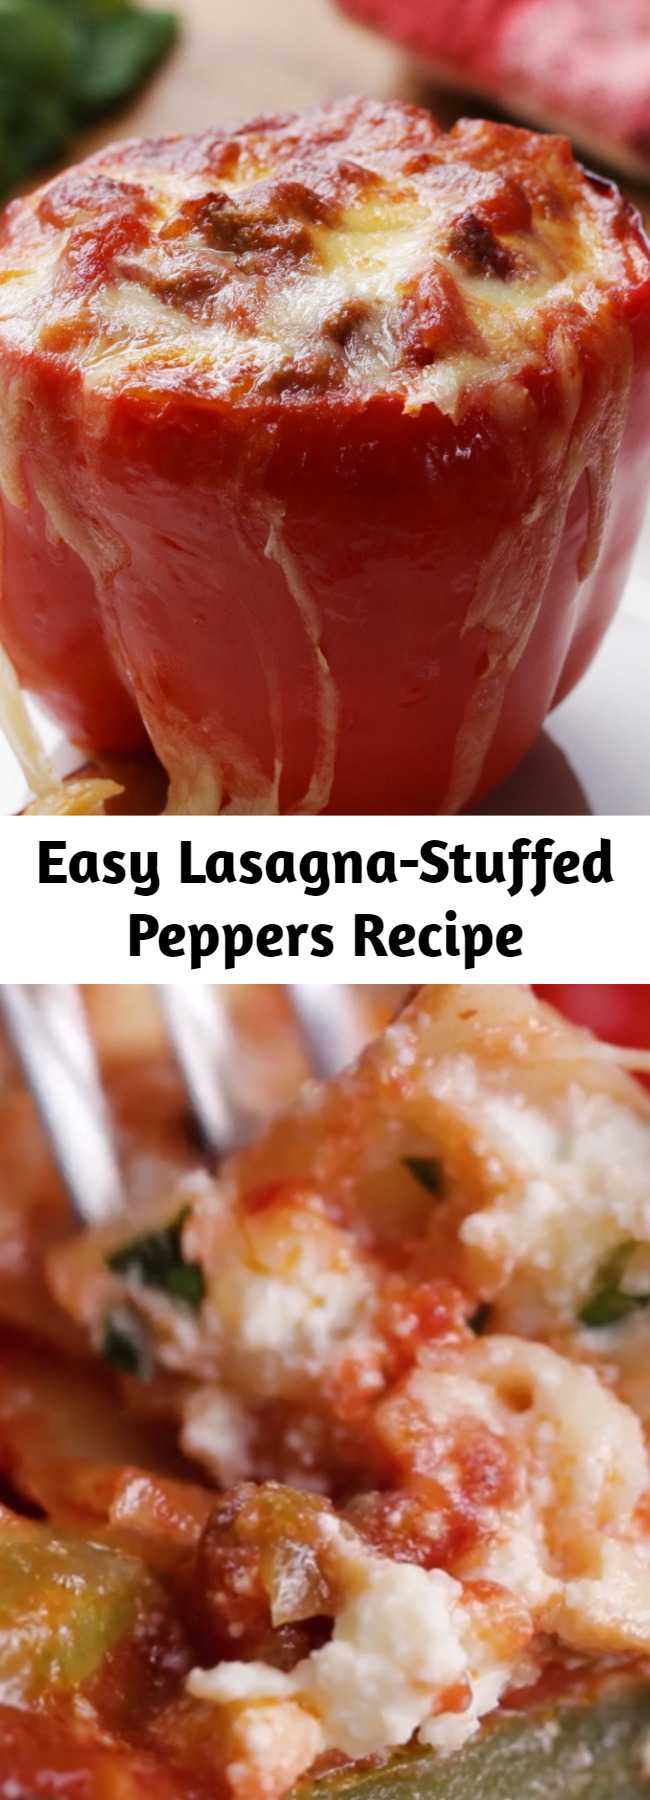 Easy Lasagna-Stuffed Peppers Recipe - Lasagna Stuffed Peppers!! A very tasty meal that is easy to prepare!